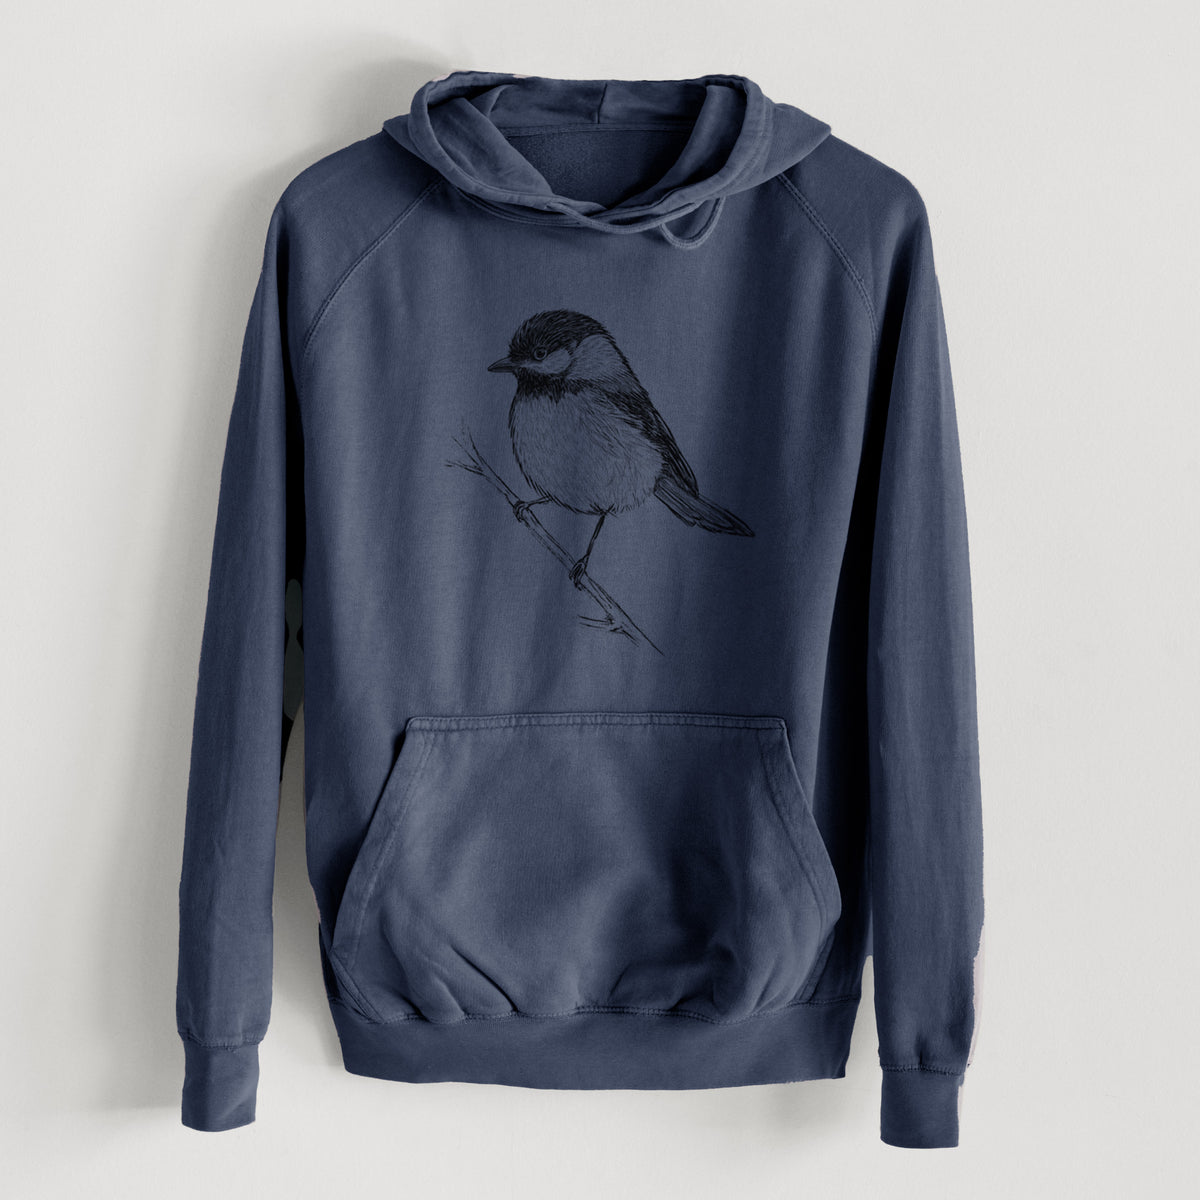 Black-capped Chickadee - Poecile atricapillus  - Mid-Weight Unisex Vintage 100% Cotton Hoodie